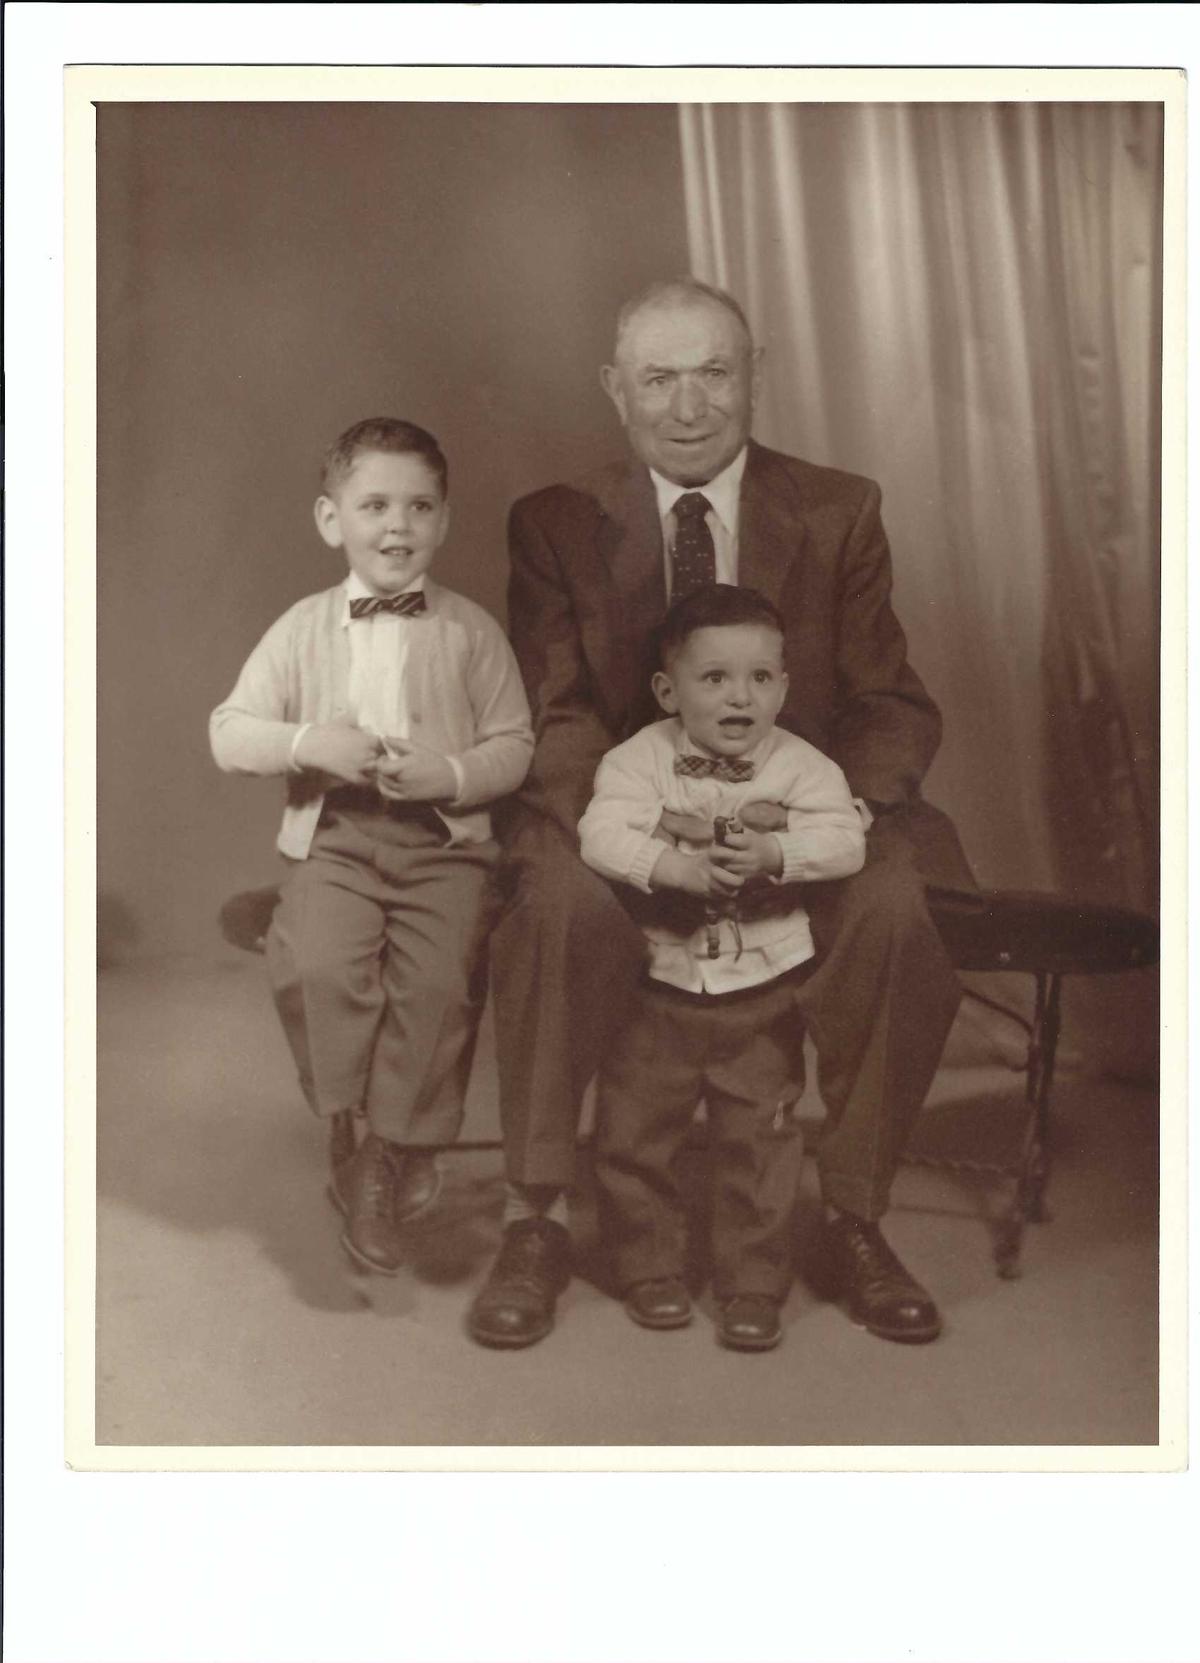 Author Cindy Alfieri's nonno, Gaspari Alfieri, with two of her brothers in the 1950s. (Courtesy of Cindy Alfieri)